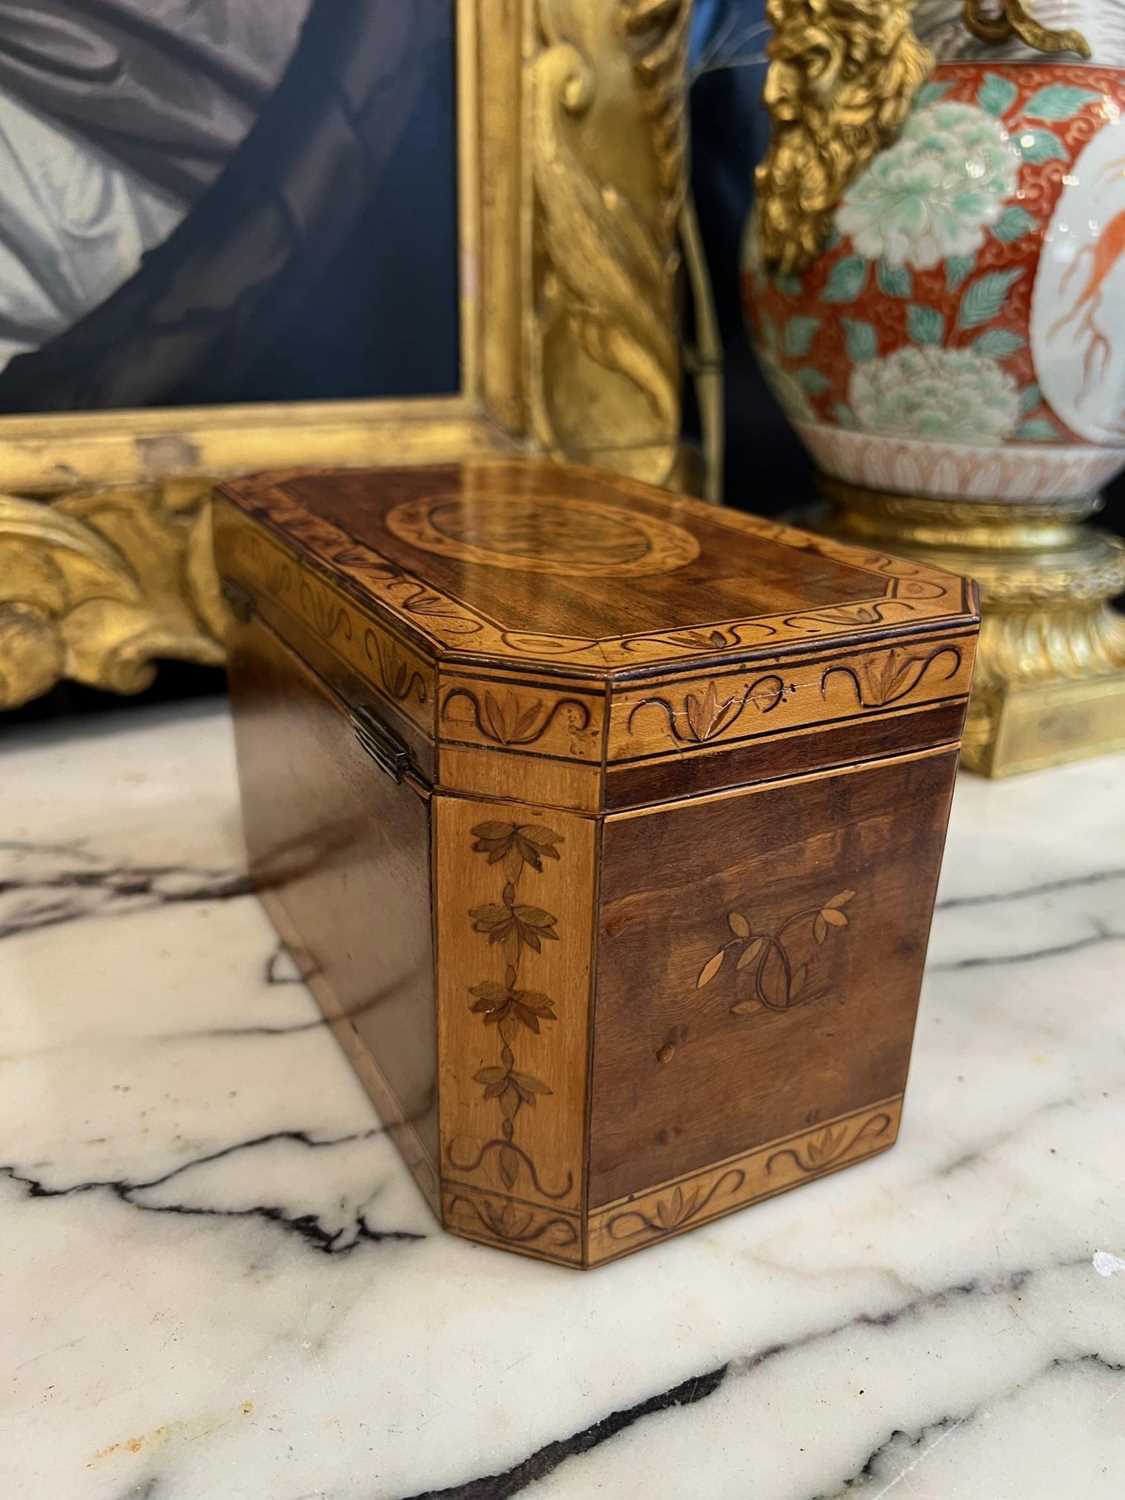 A FINE LATE 18TH / EARLY 19TH CENTURY INLAID SATINWOOD TEA CADDY - Image 2 of 7